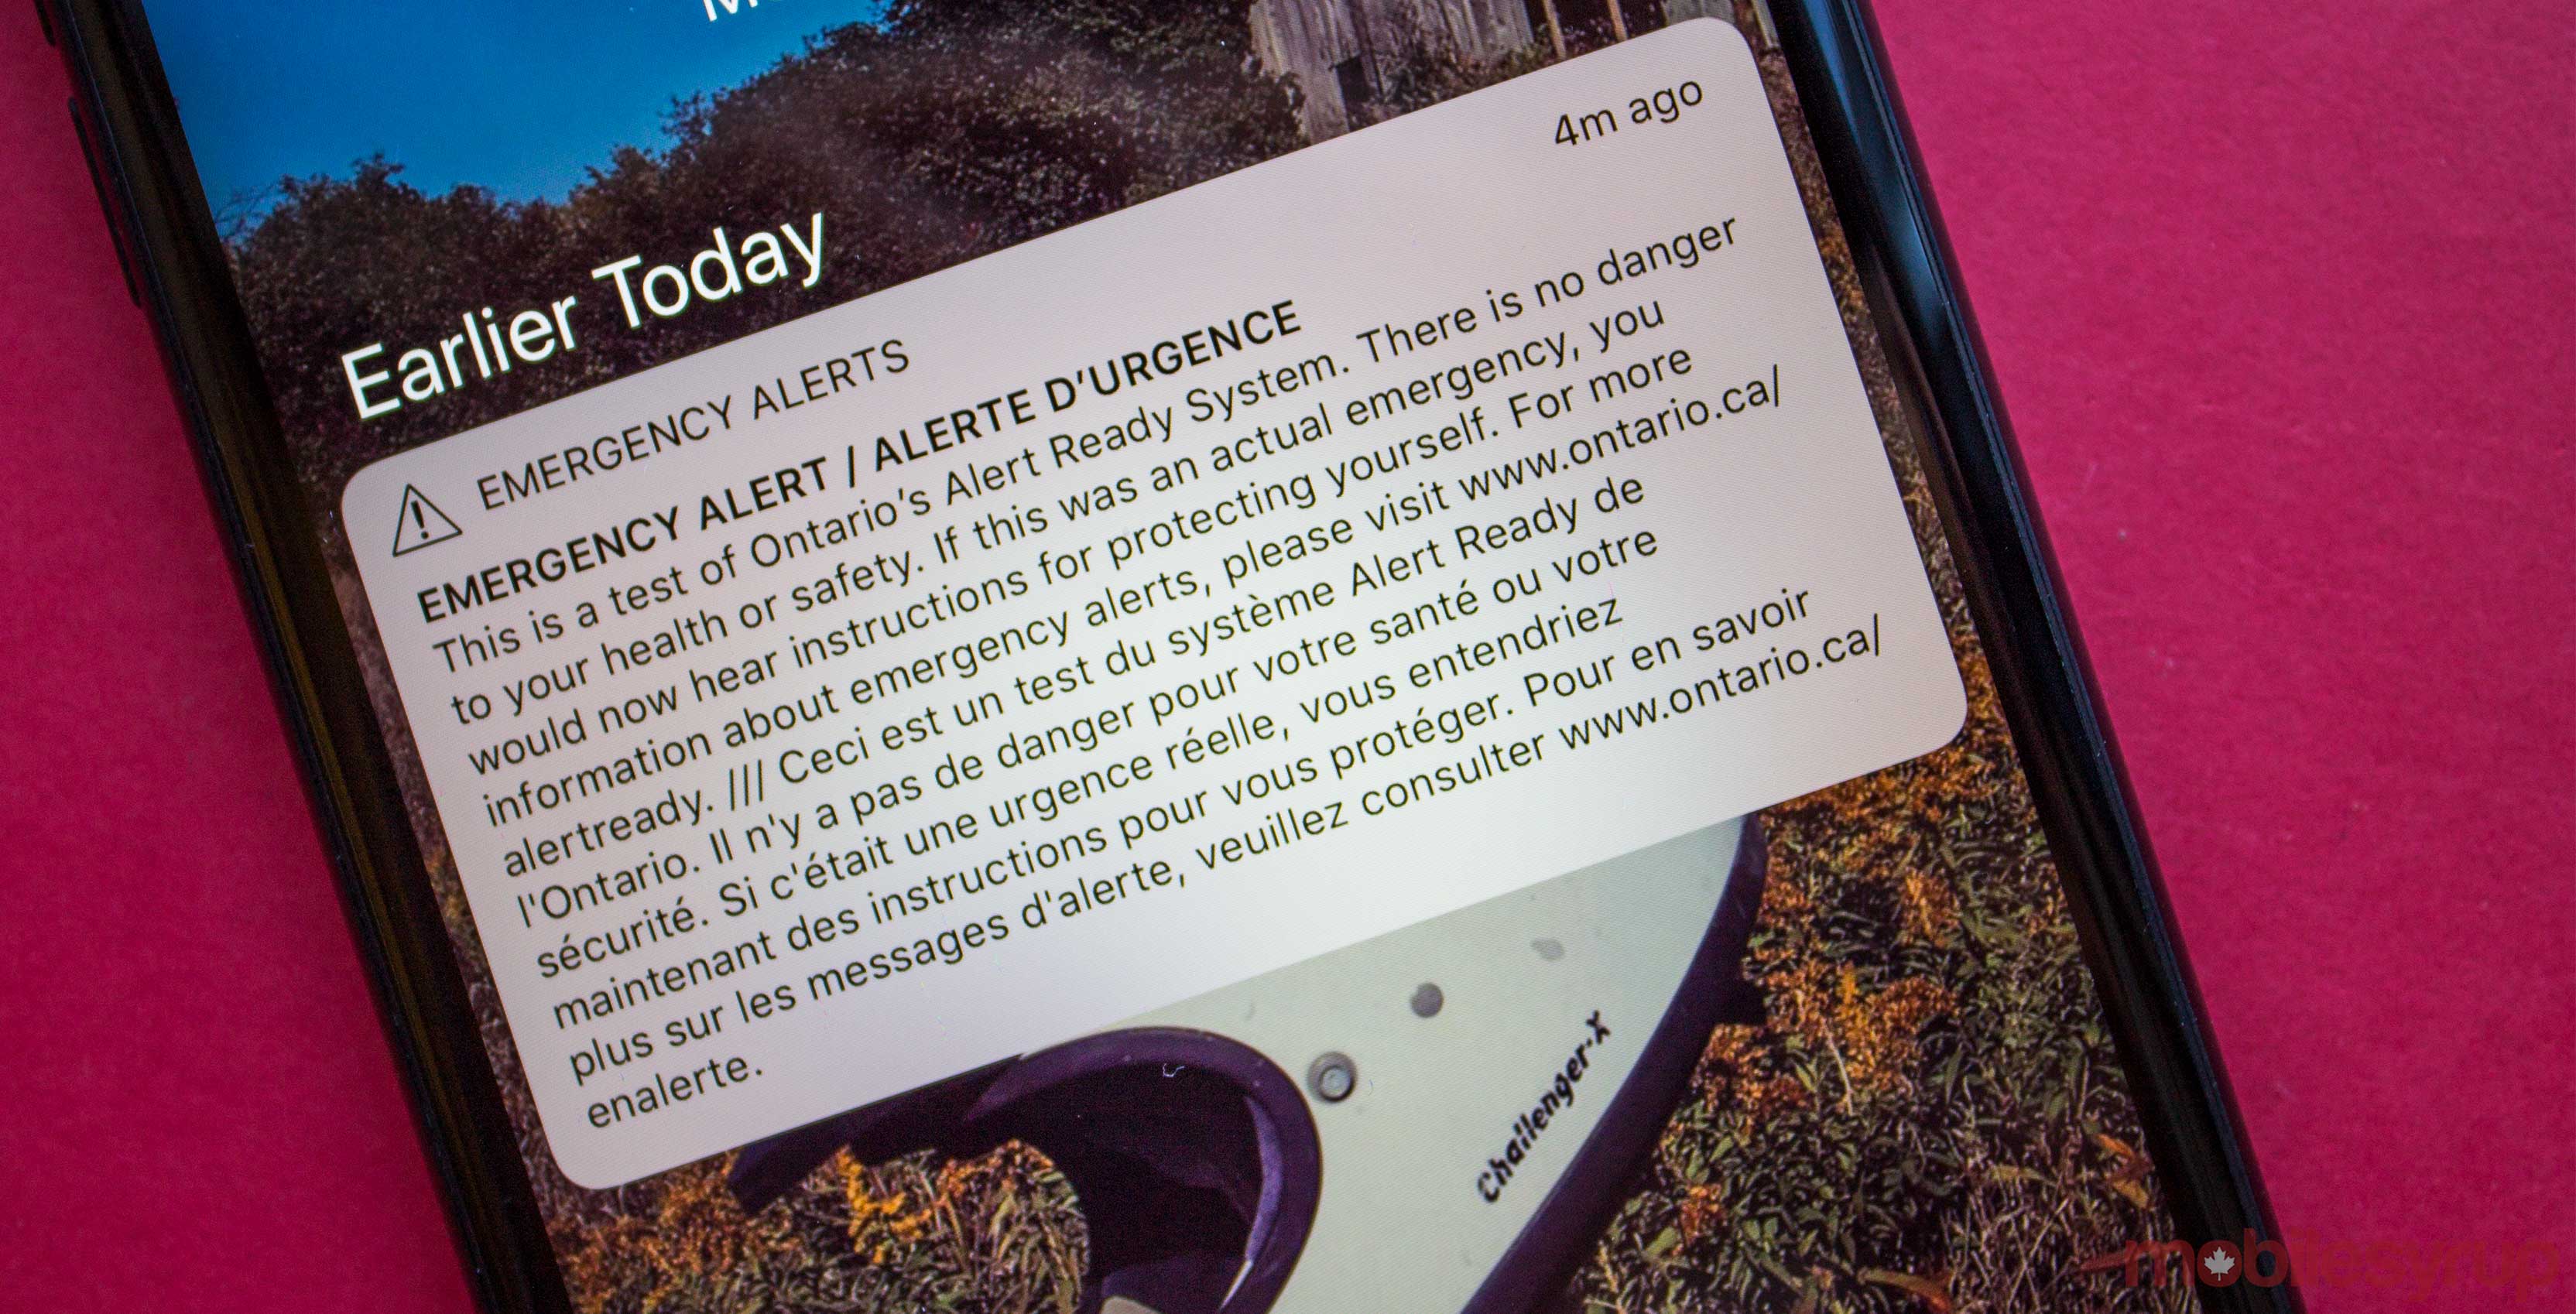 Ontario’s first emergency text alert gets a mixed reception